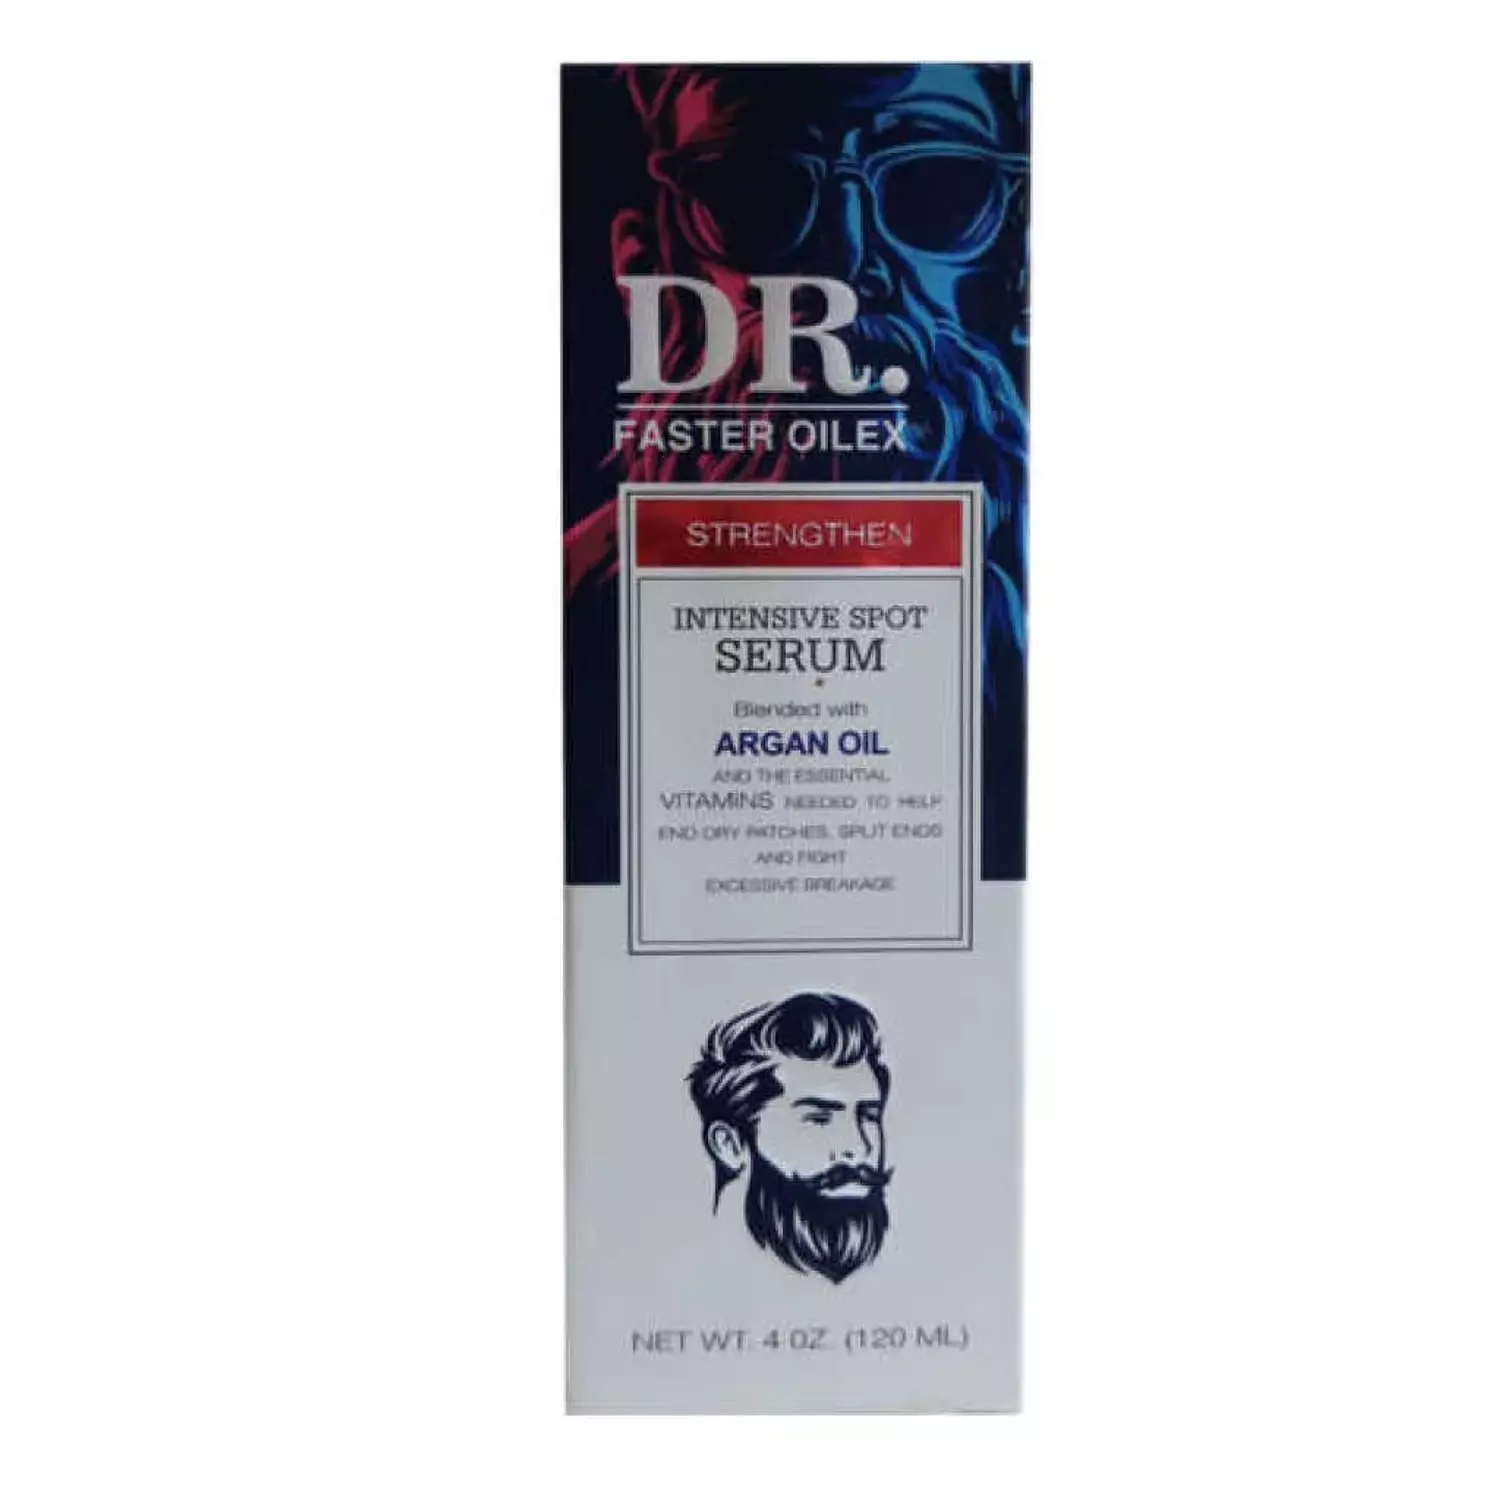 Dr. Faster Oilex Intensive Spot Serum With Argan Oil hover image